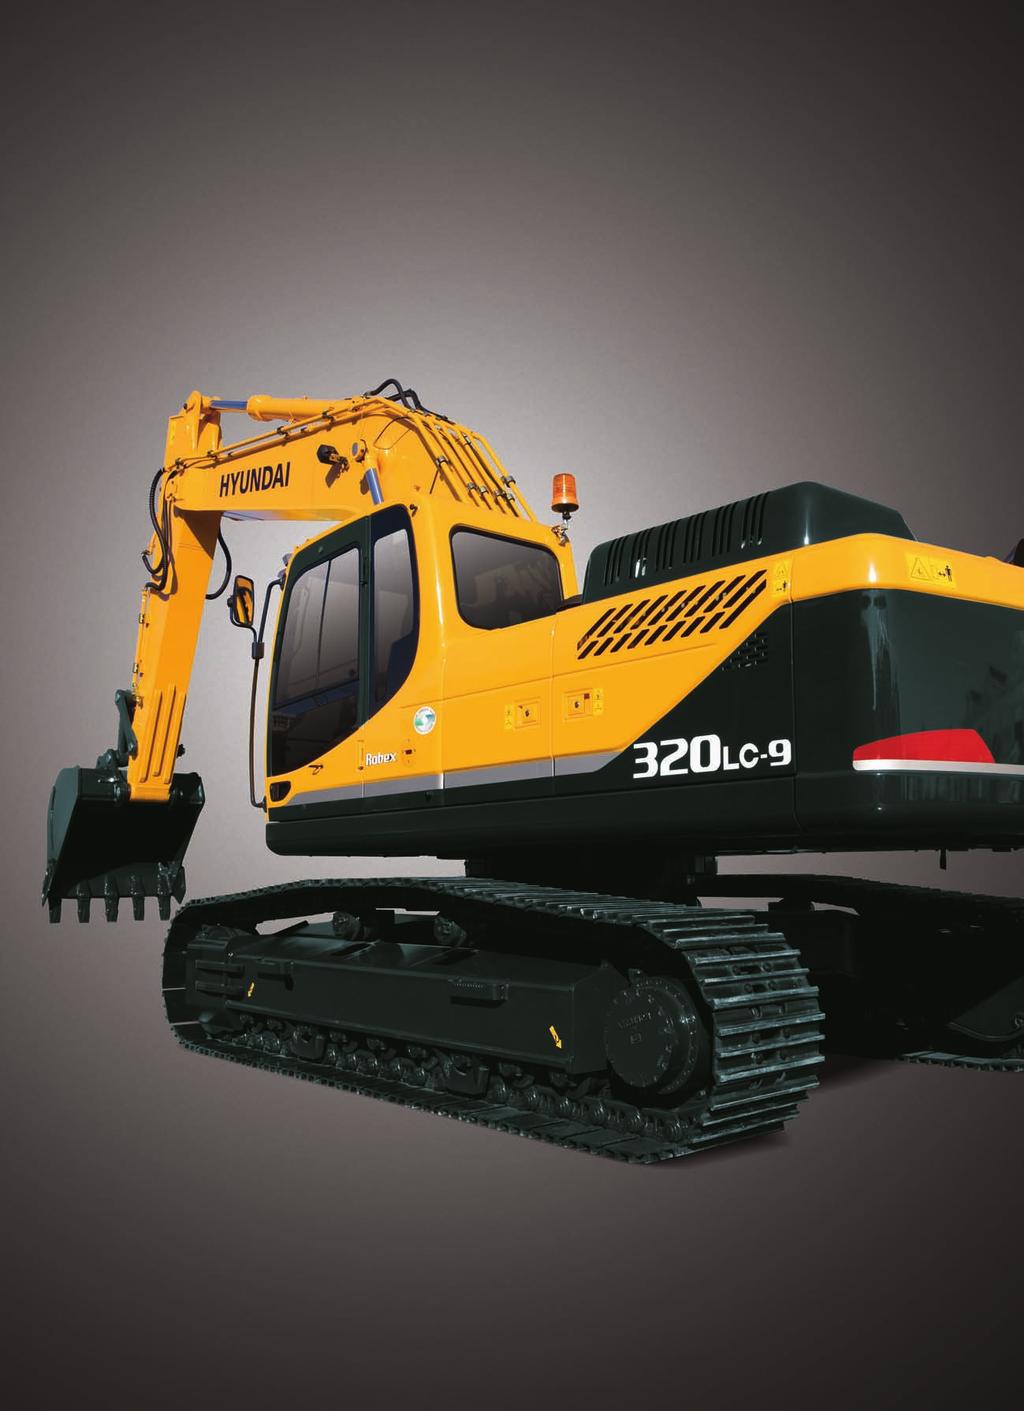 Precision Innovative hydraulic system technologies make the 9 series excavator fast, smooth and easy to control.